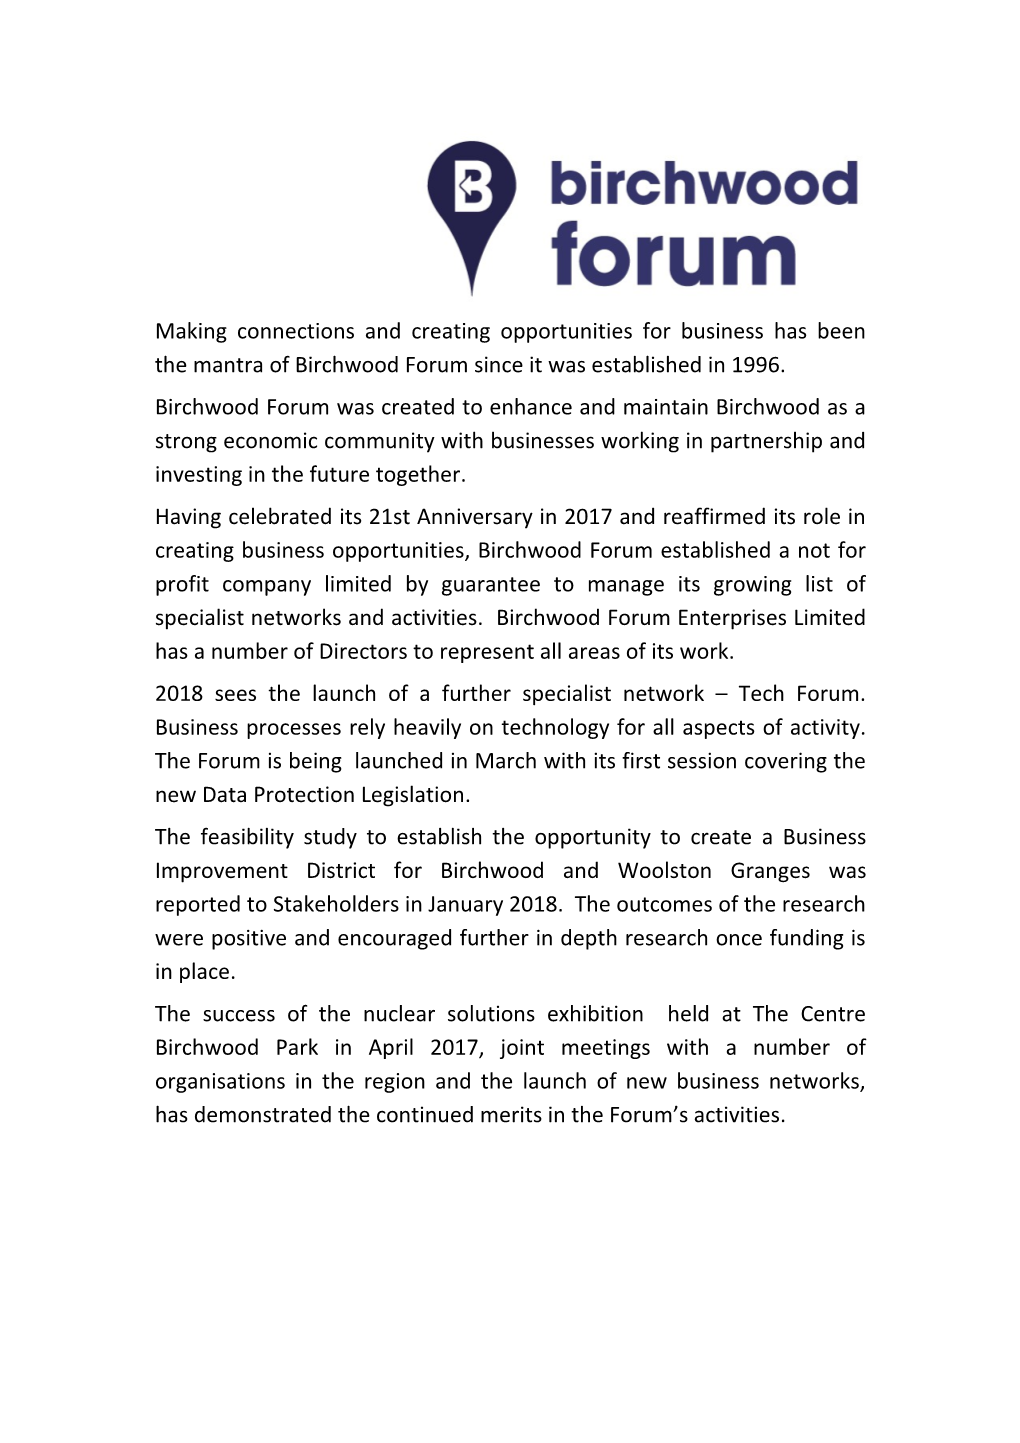 Making Connections and Creating Opportunities for Business Has Been the Mantra of Birchwood Forum Since It Was Established in 1996